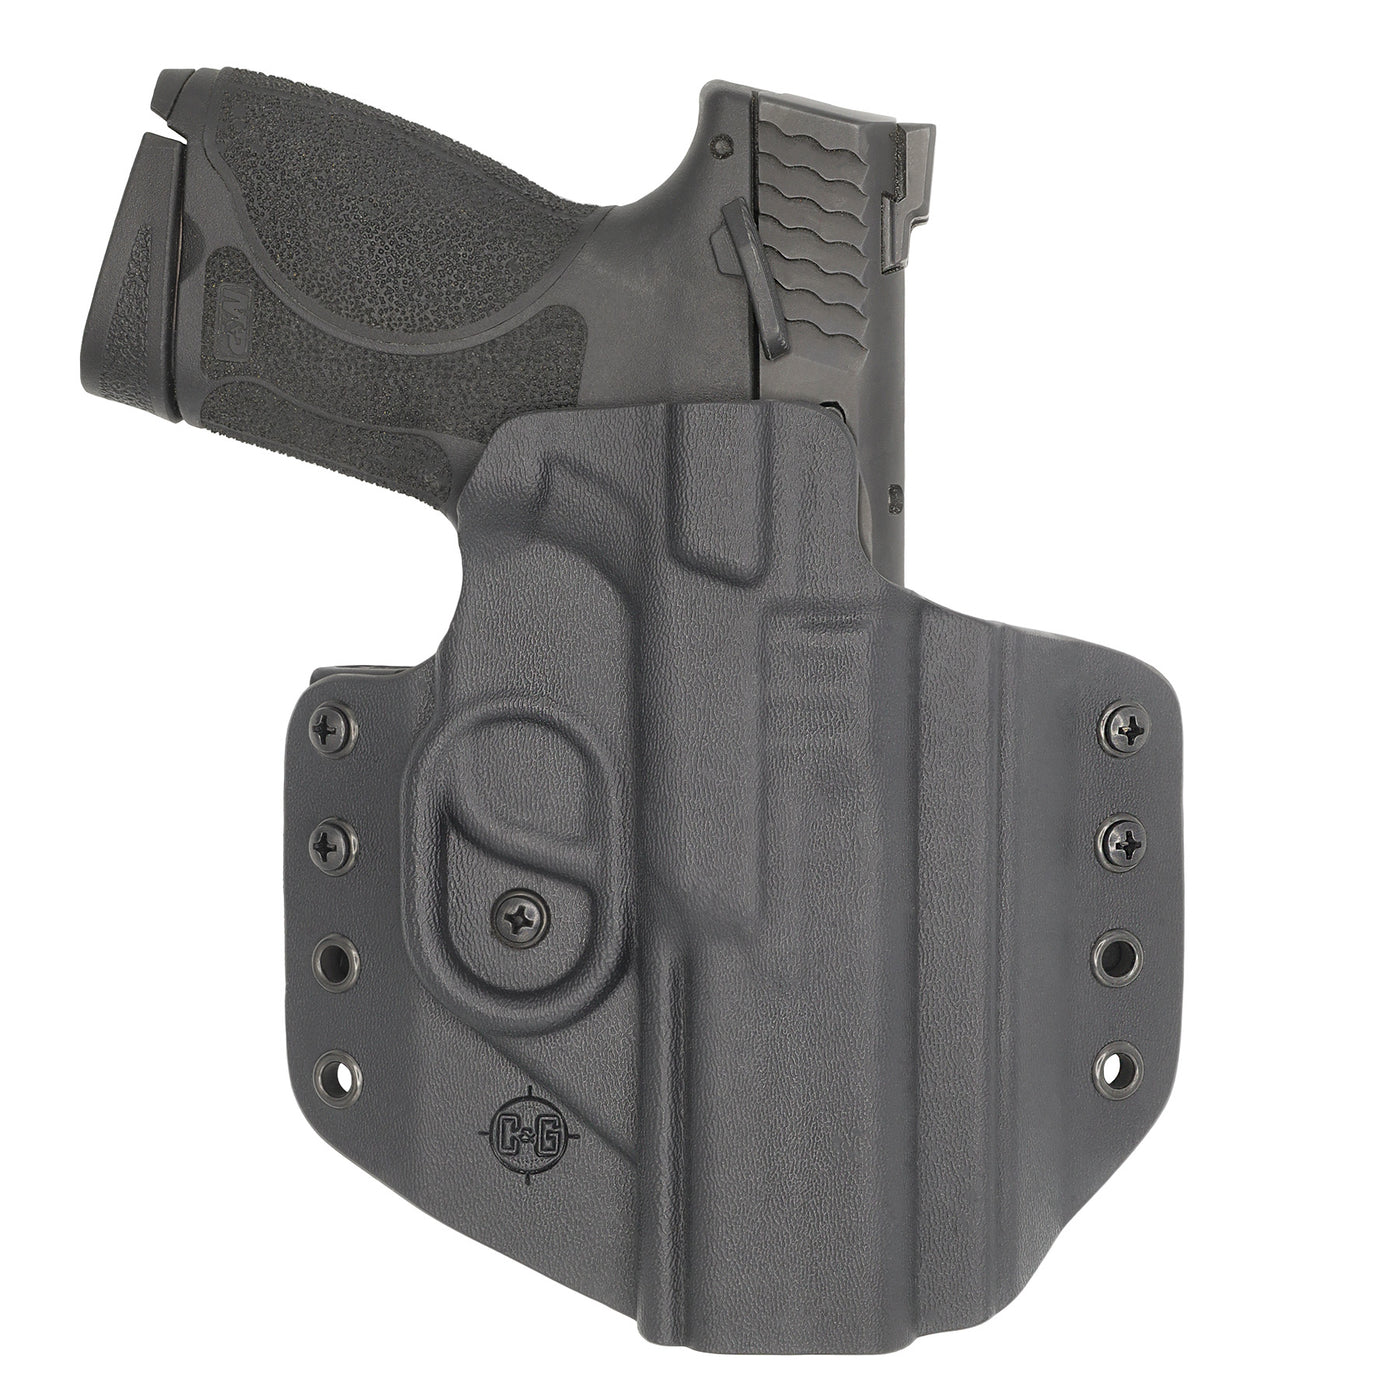 C&G Holsters custom OWB Covert S&W M&P 10/45 4.6" in holstered position